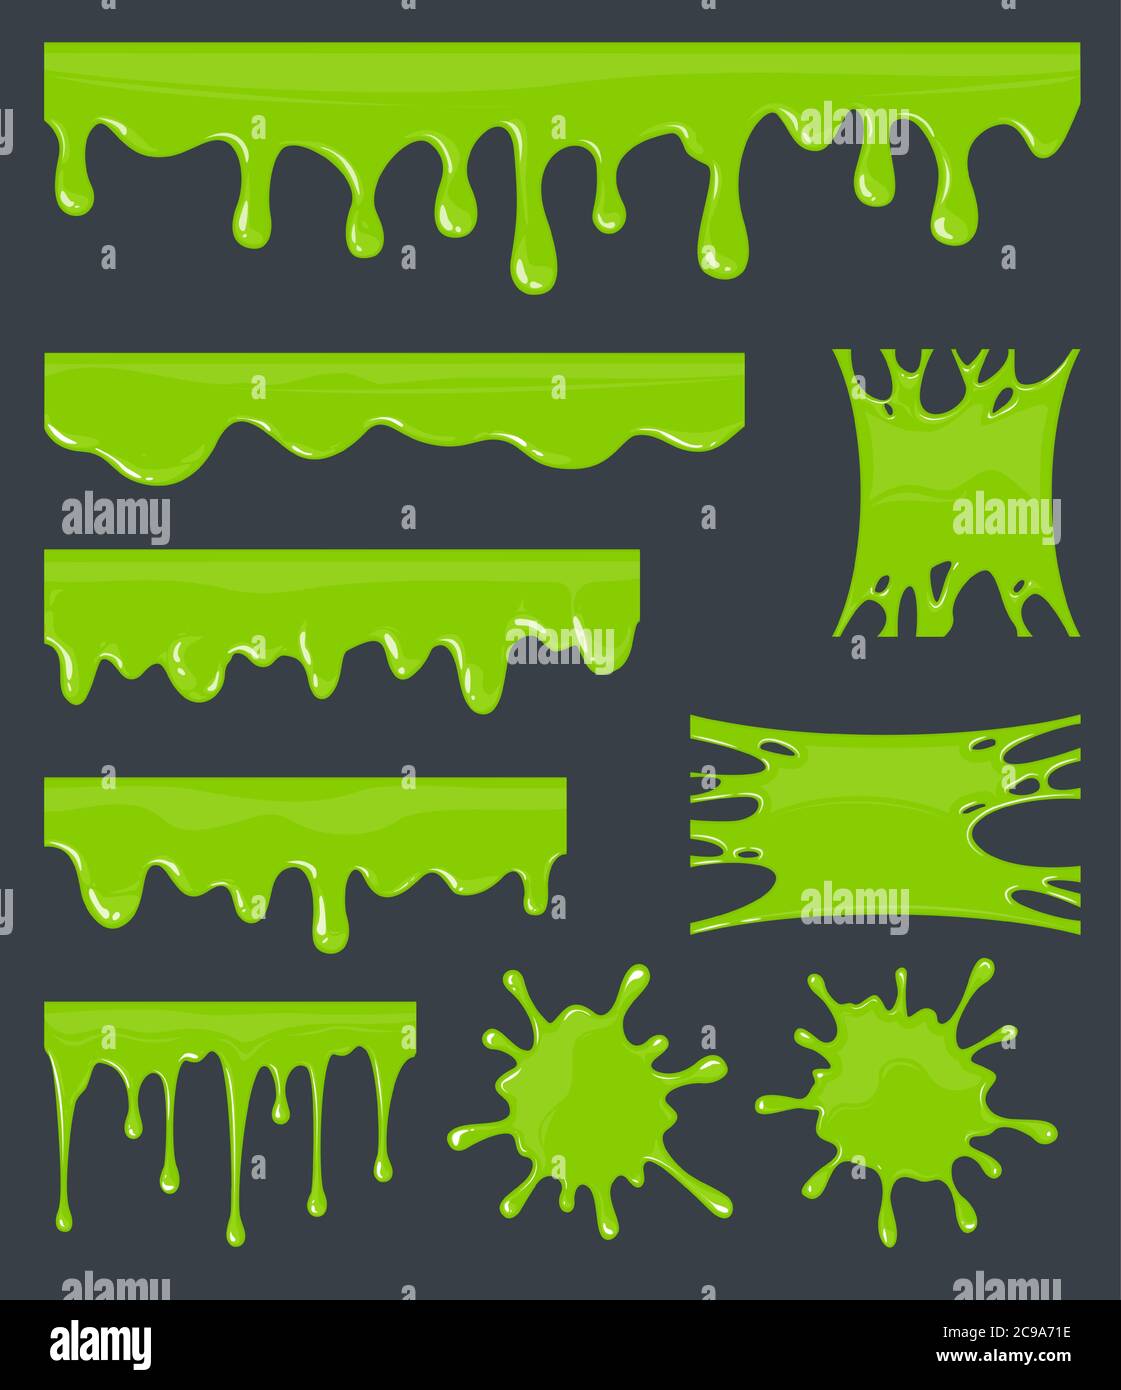 Slime Stock Vector Images - Alamy